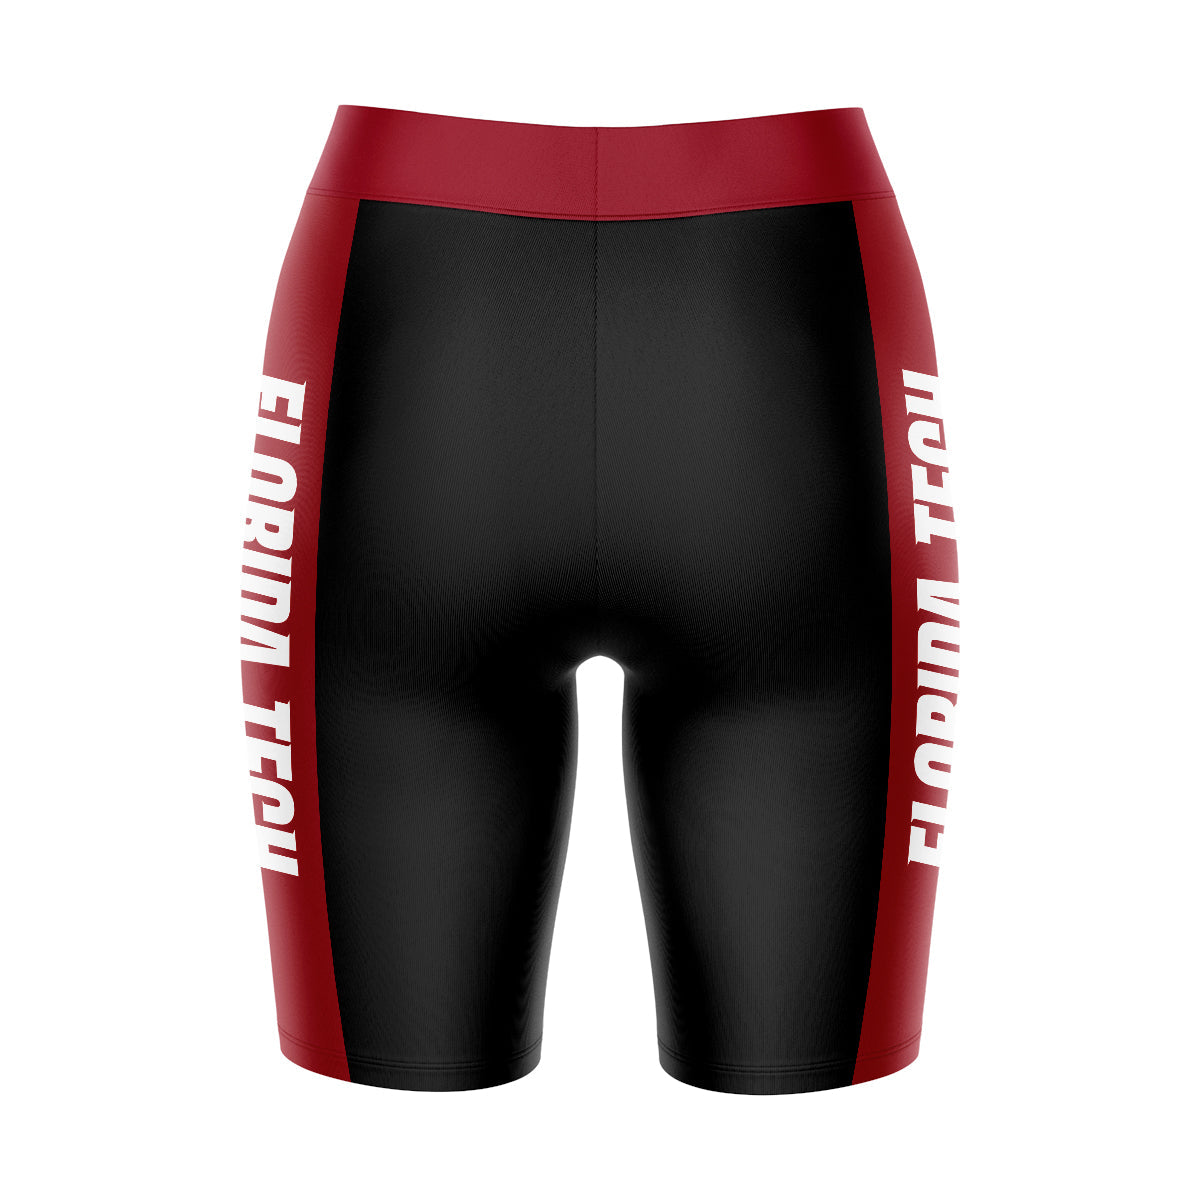 Florida Tech Panthers Vive La Fete Game Day Logo on Waistband and Red Stripes Black Women Bike Short 9 Inseam